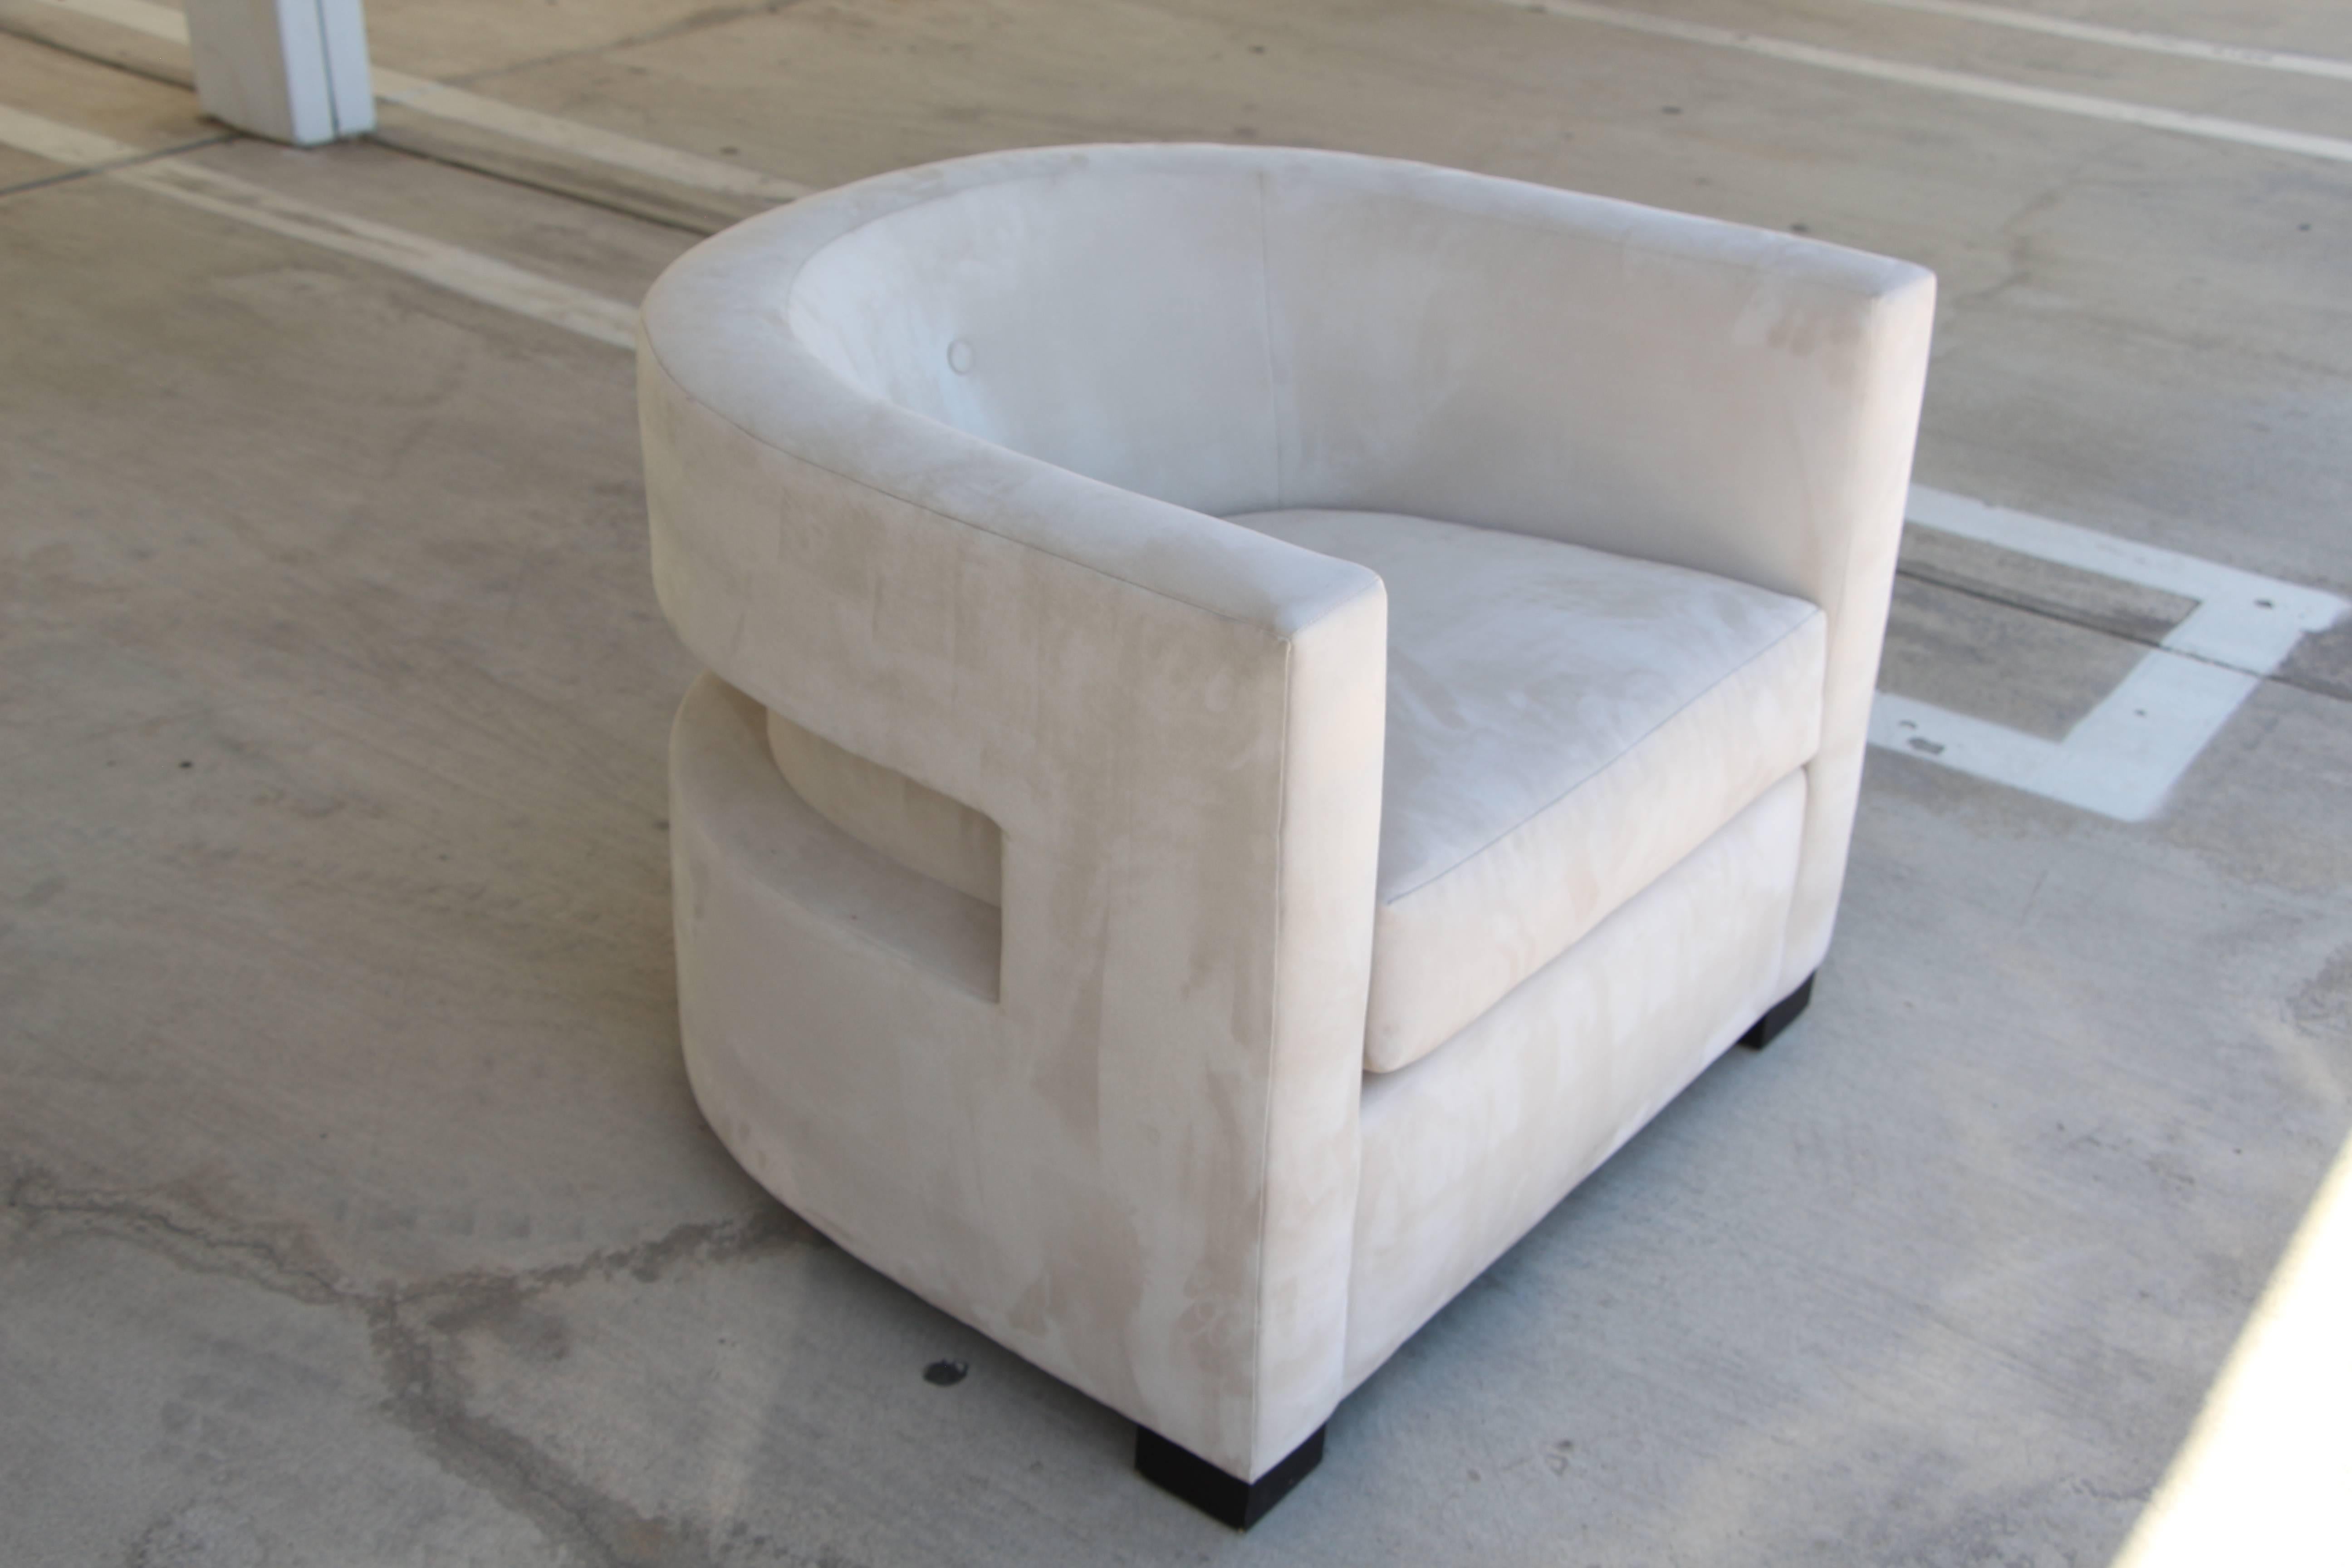 A most unusual club or lounge chair in a micro fiber or ultrasuede fabric. It is quite a lovely chair. It bears the label of a defunct high end west coast furniture store. Don't know who designed this piece but it is quite stunning and comfortable.